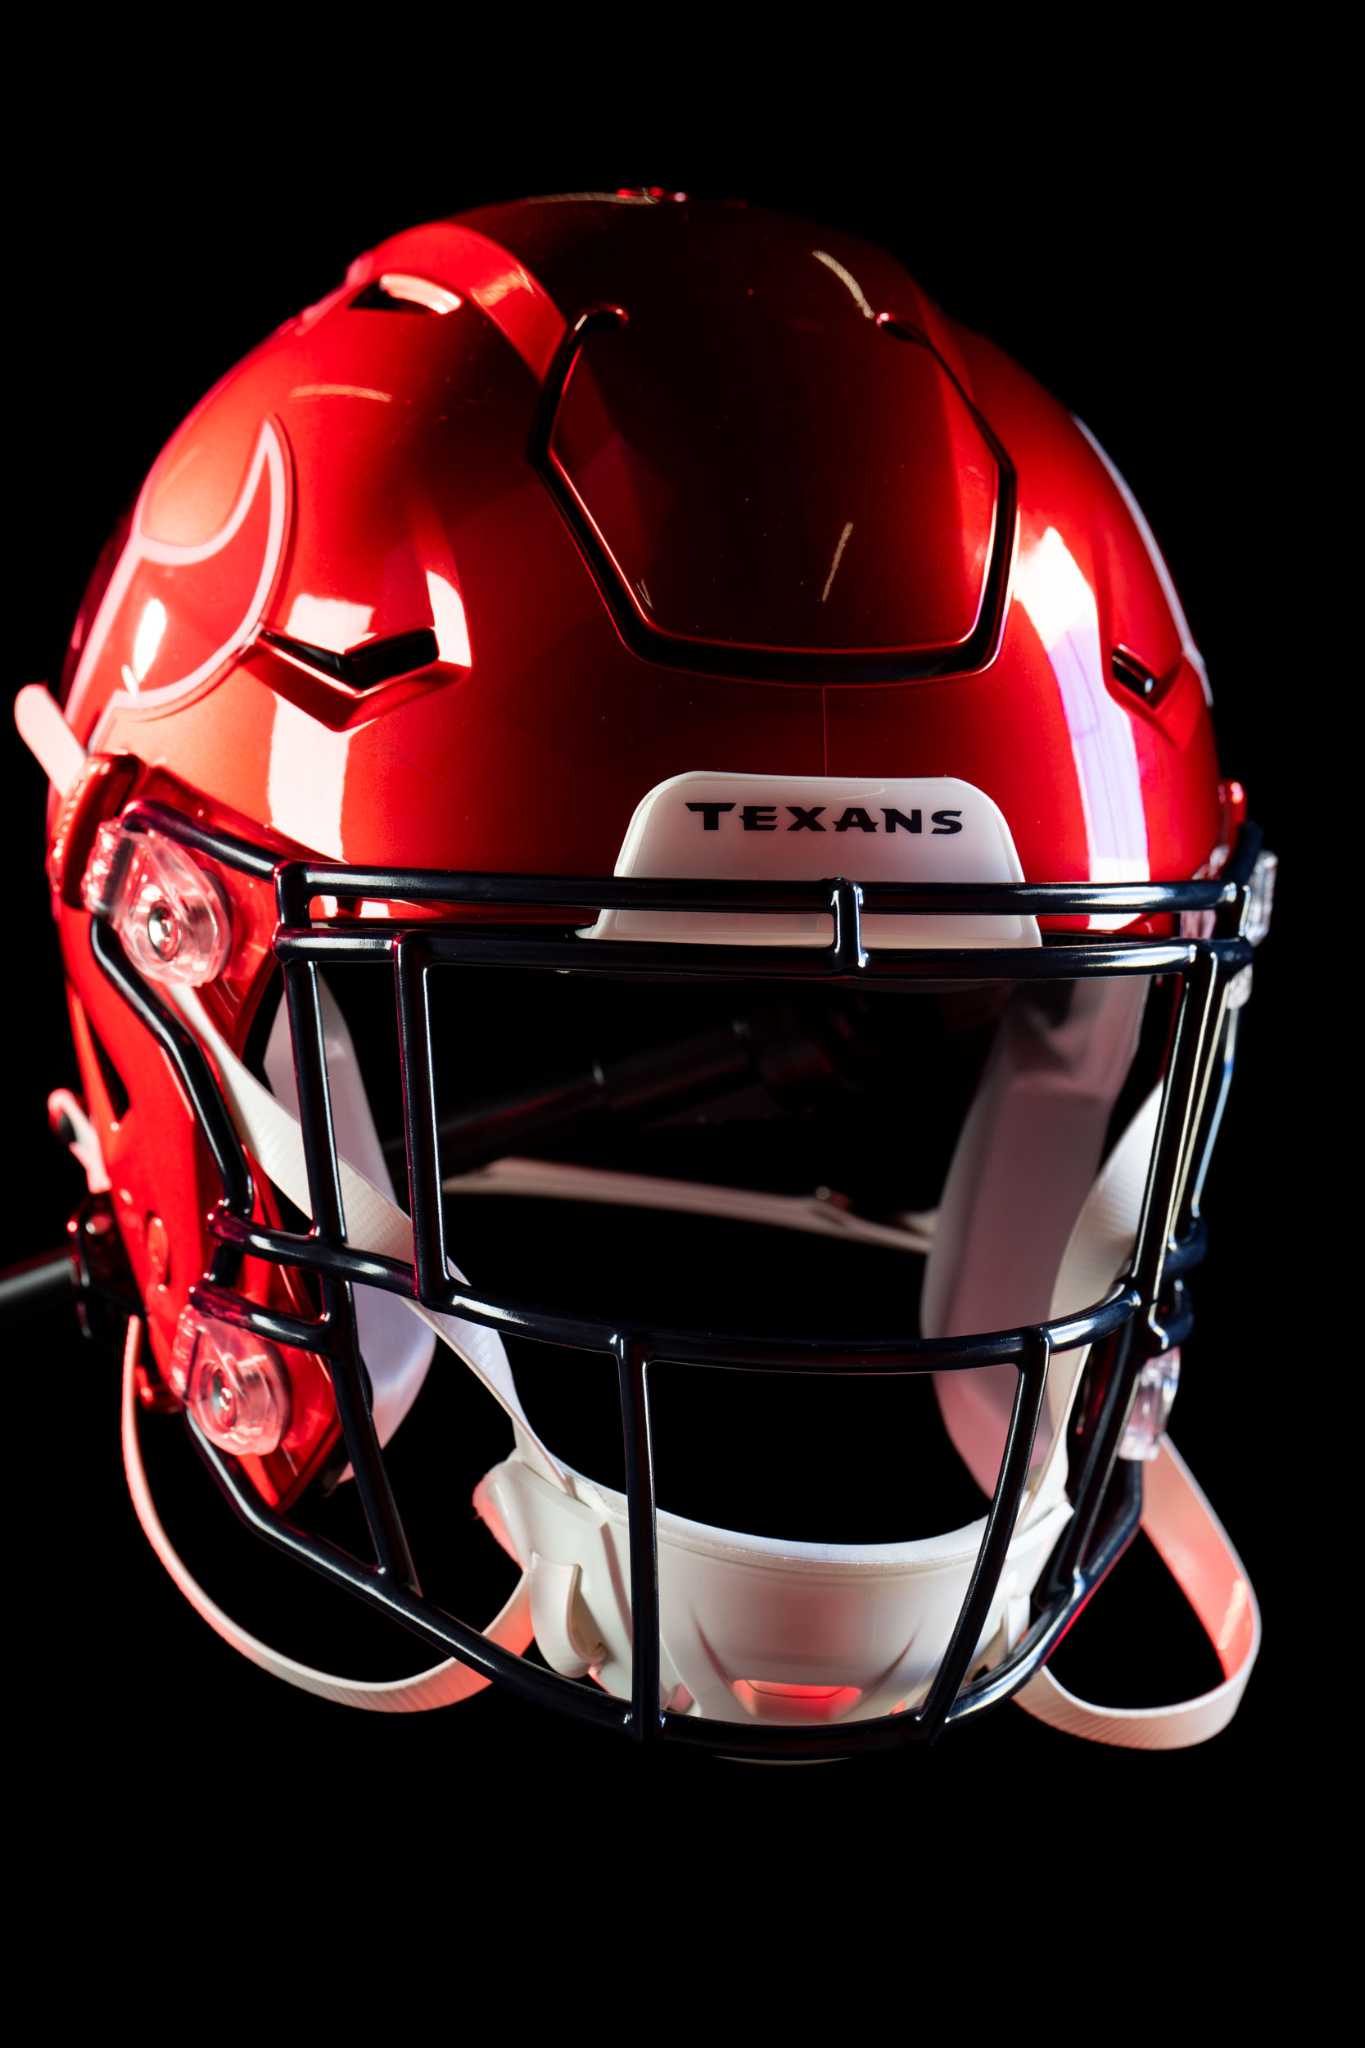 Houston Texans to wear Battle Red helmets for a game this season